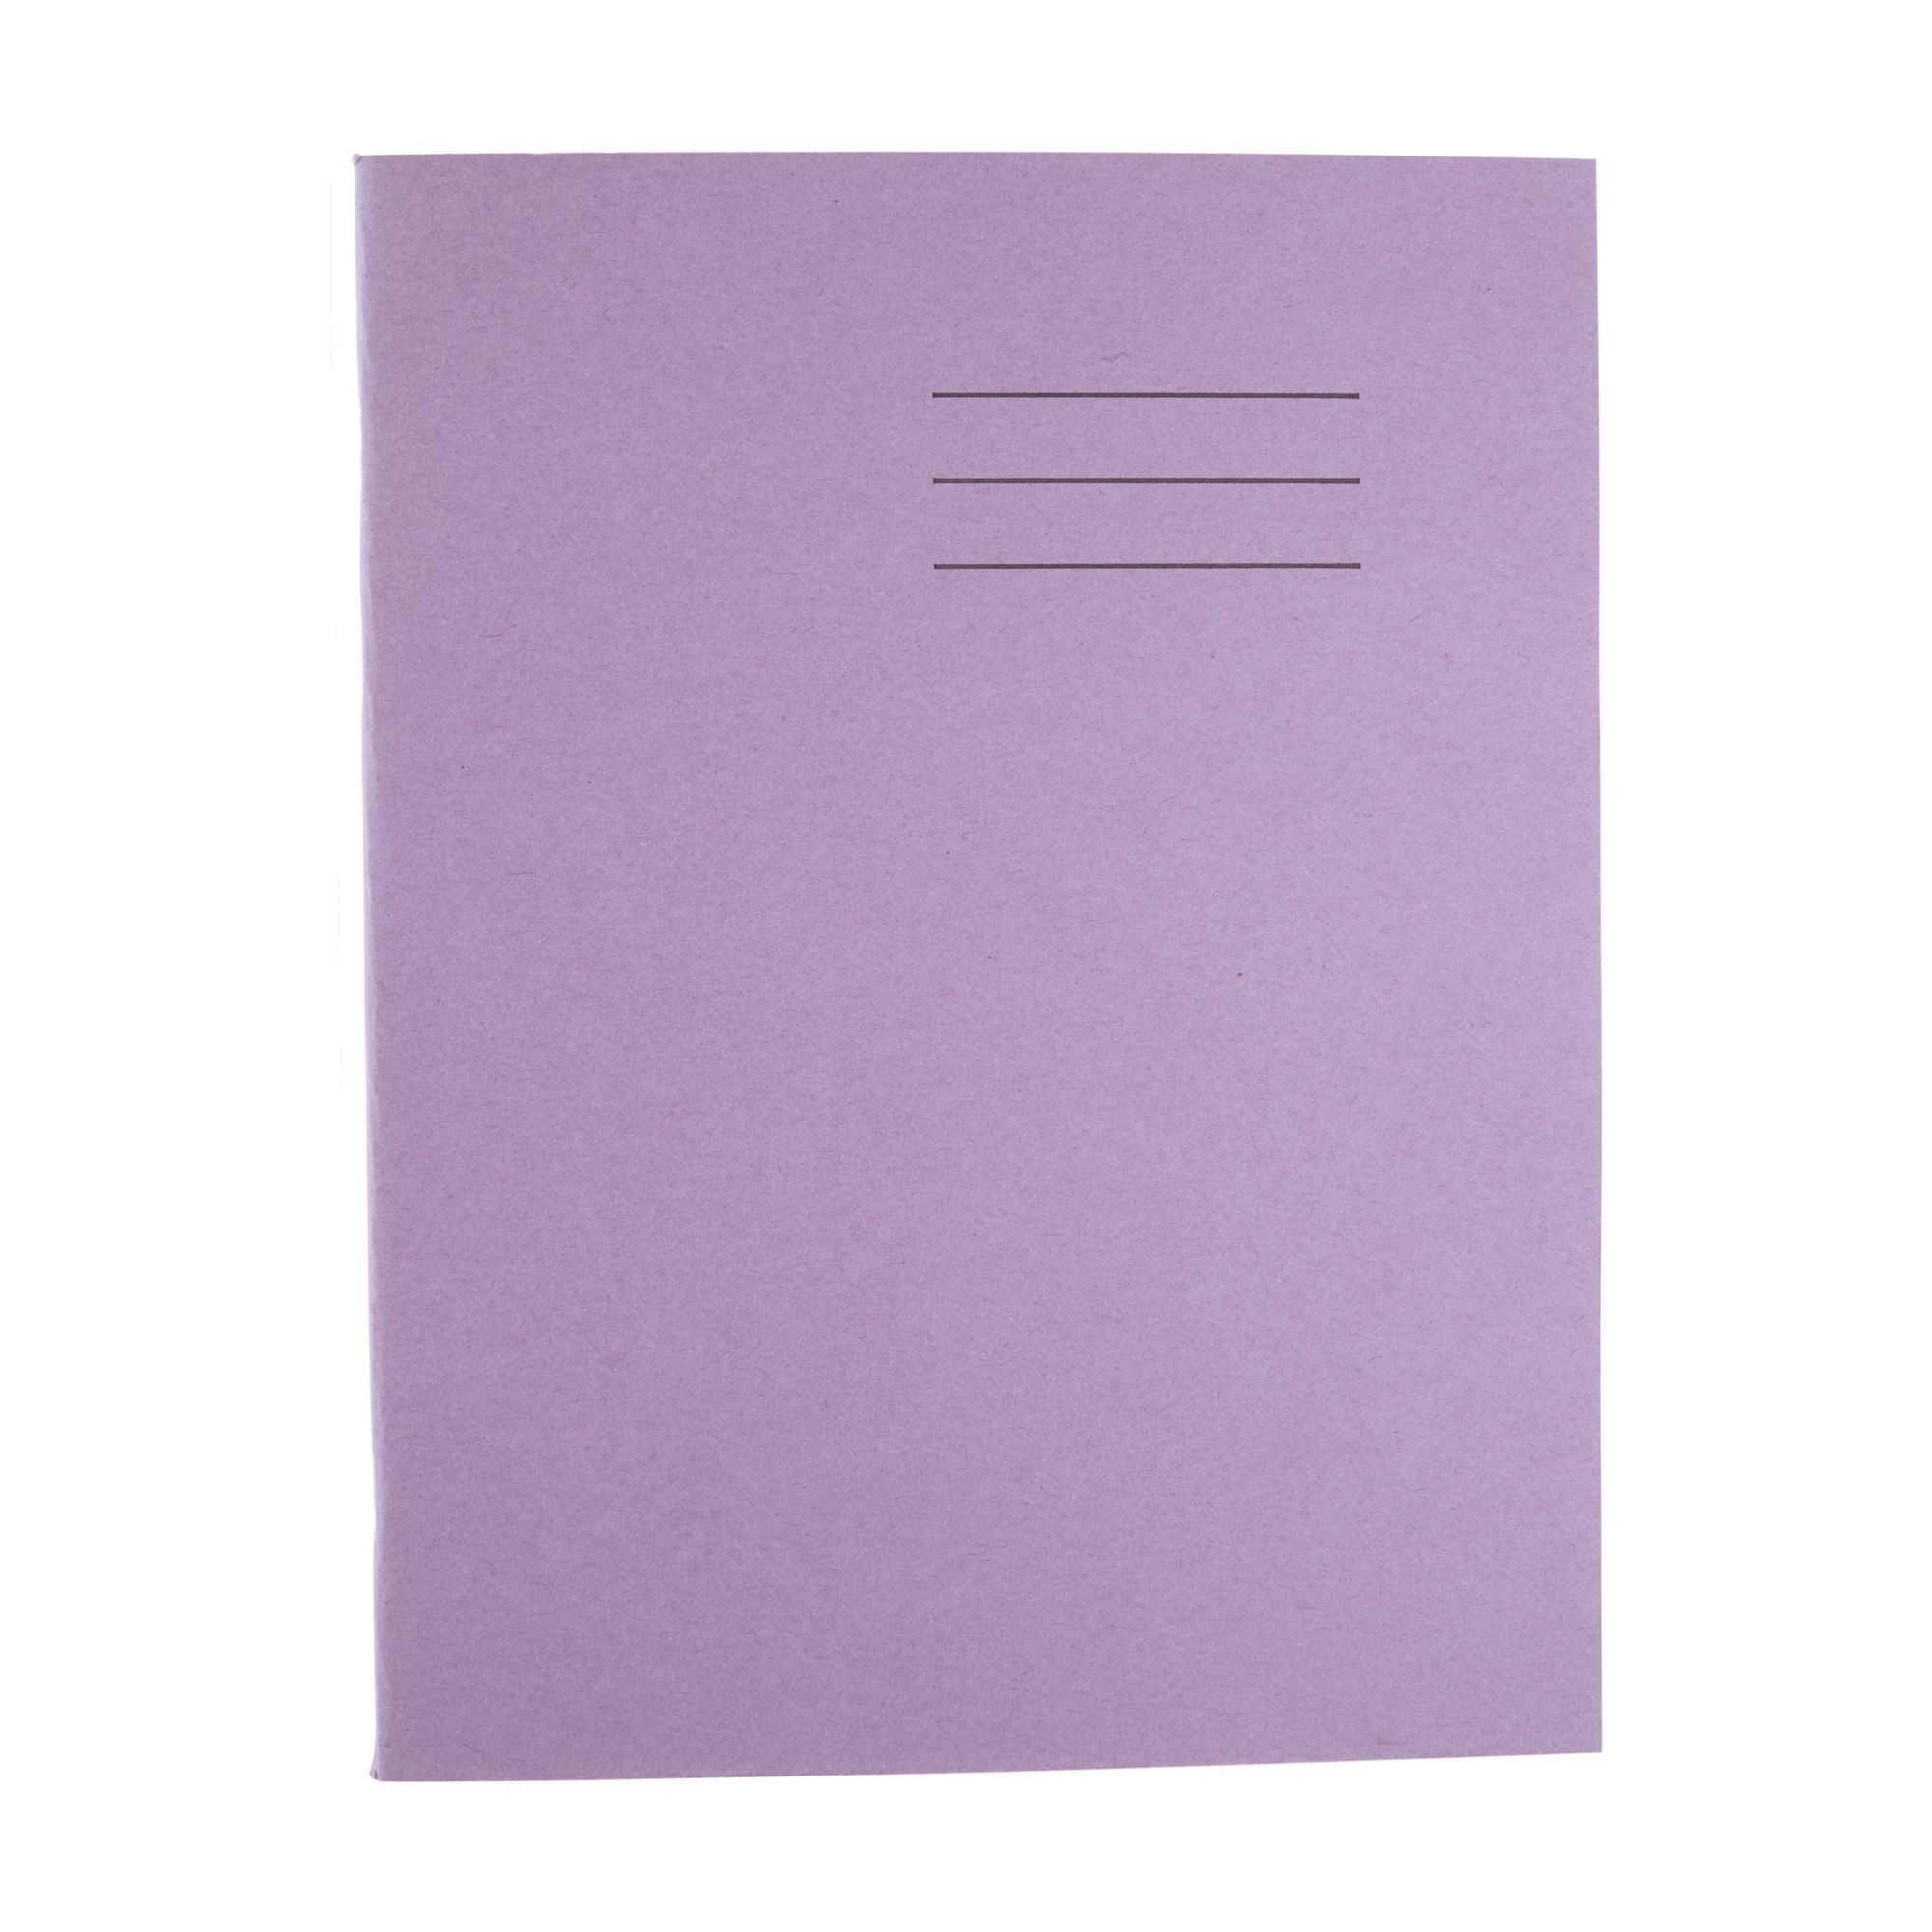 A4 Exercise Book 32 Page, Plain no Ruling, Purple - Pack of 100